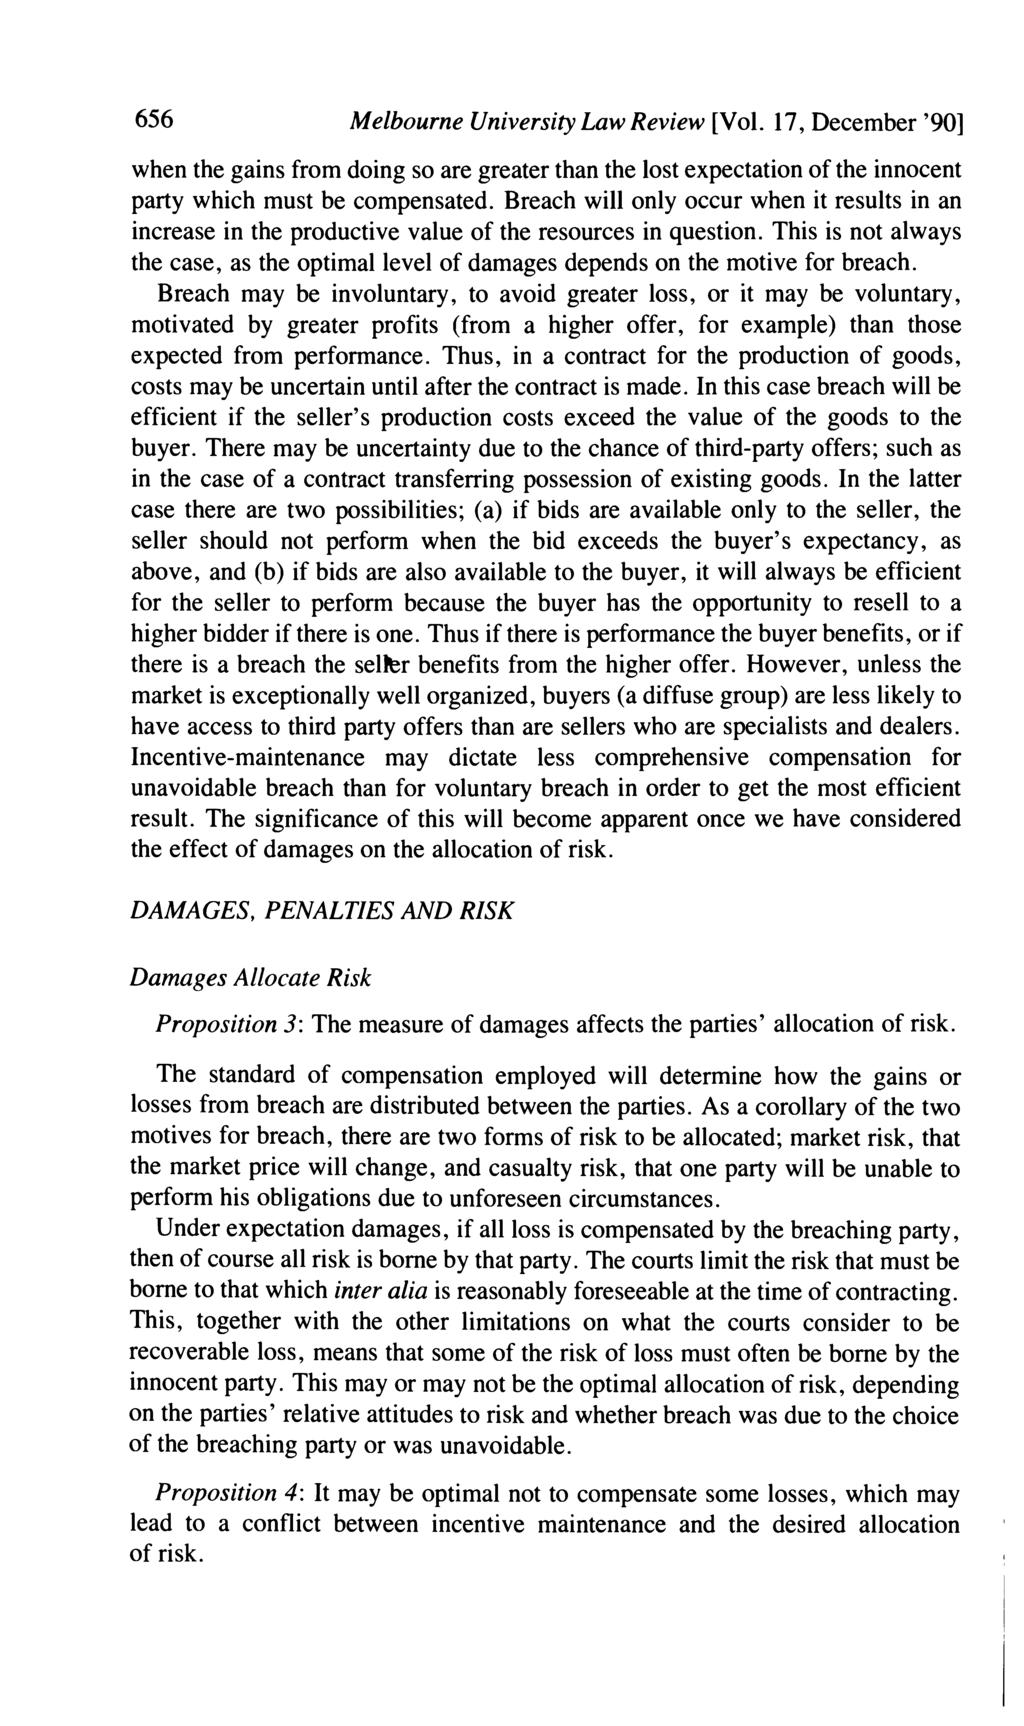 656 Melbourne University Law Review [Vol. 17, December '901 when the gains from doing so are greater than the lost expectation of the innocent party which must be compensated.